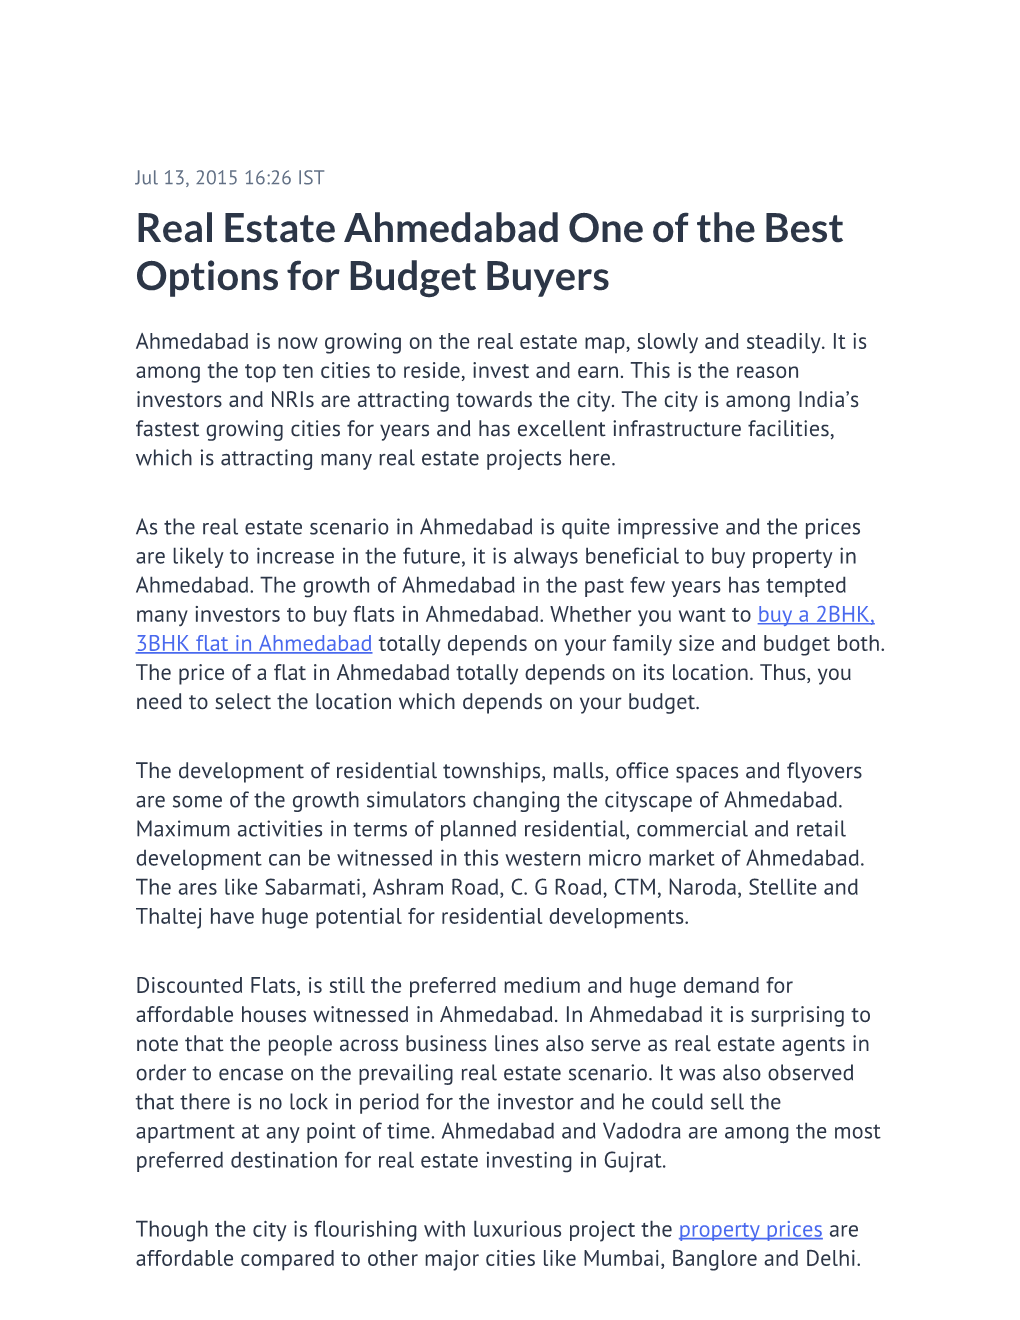 Real Estate Ahmedabad One of the Best Options for Budget Buyers